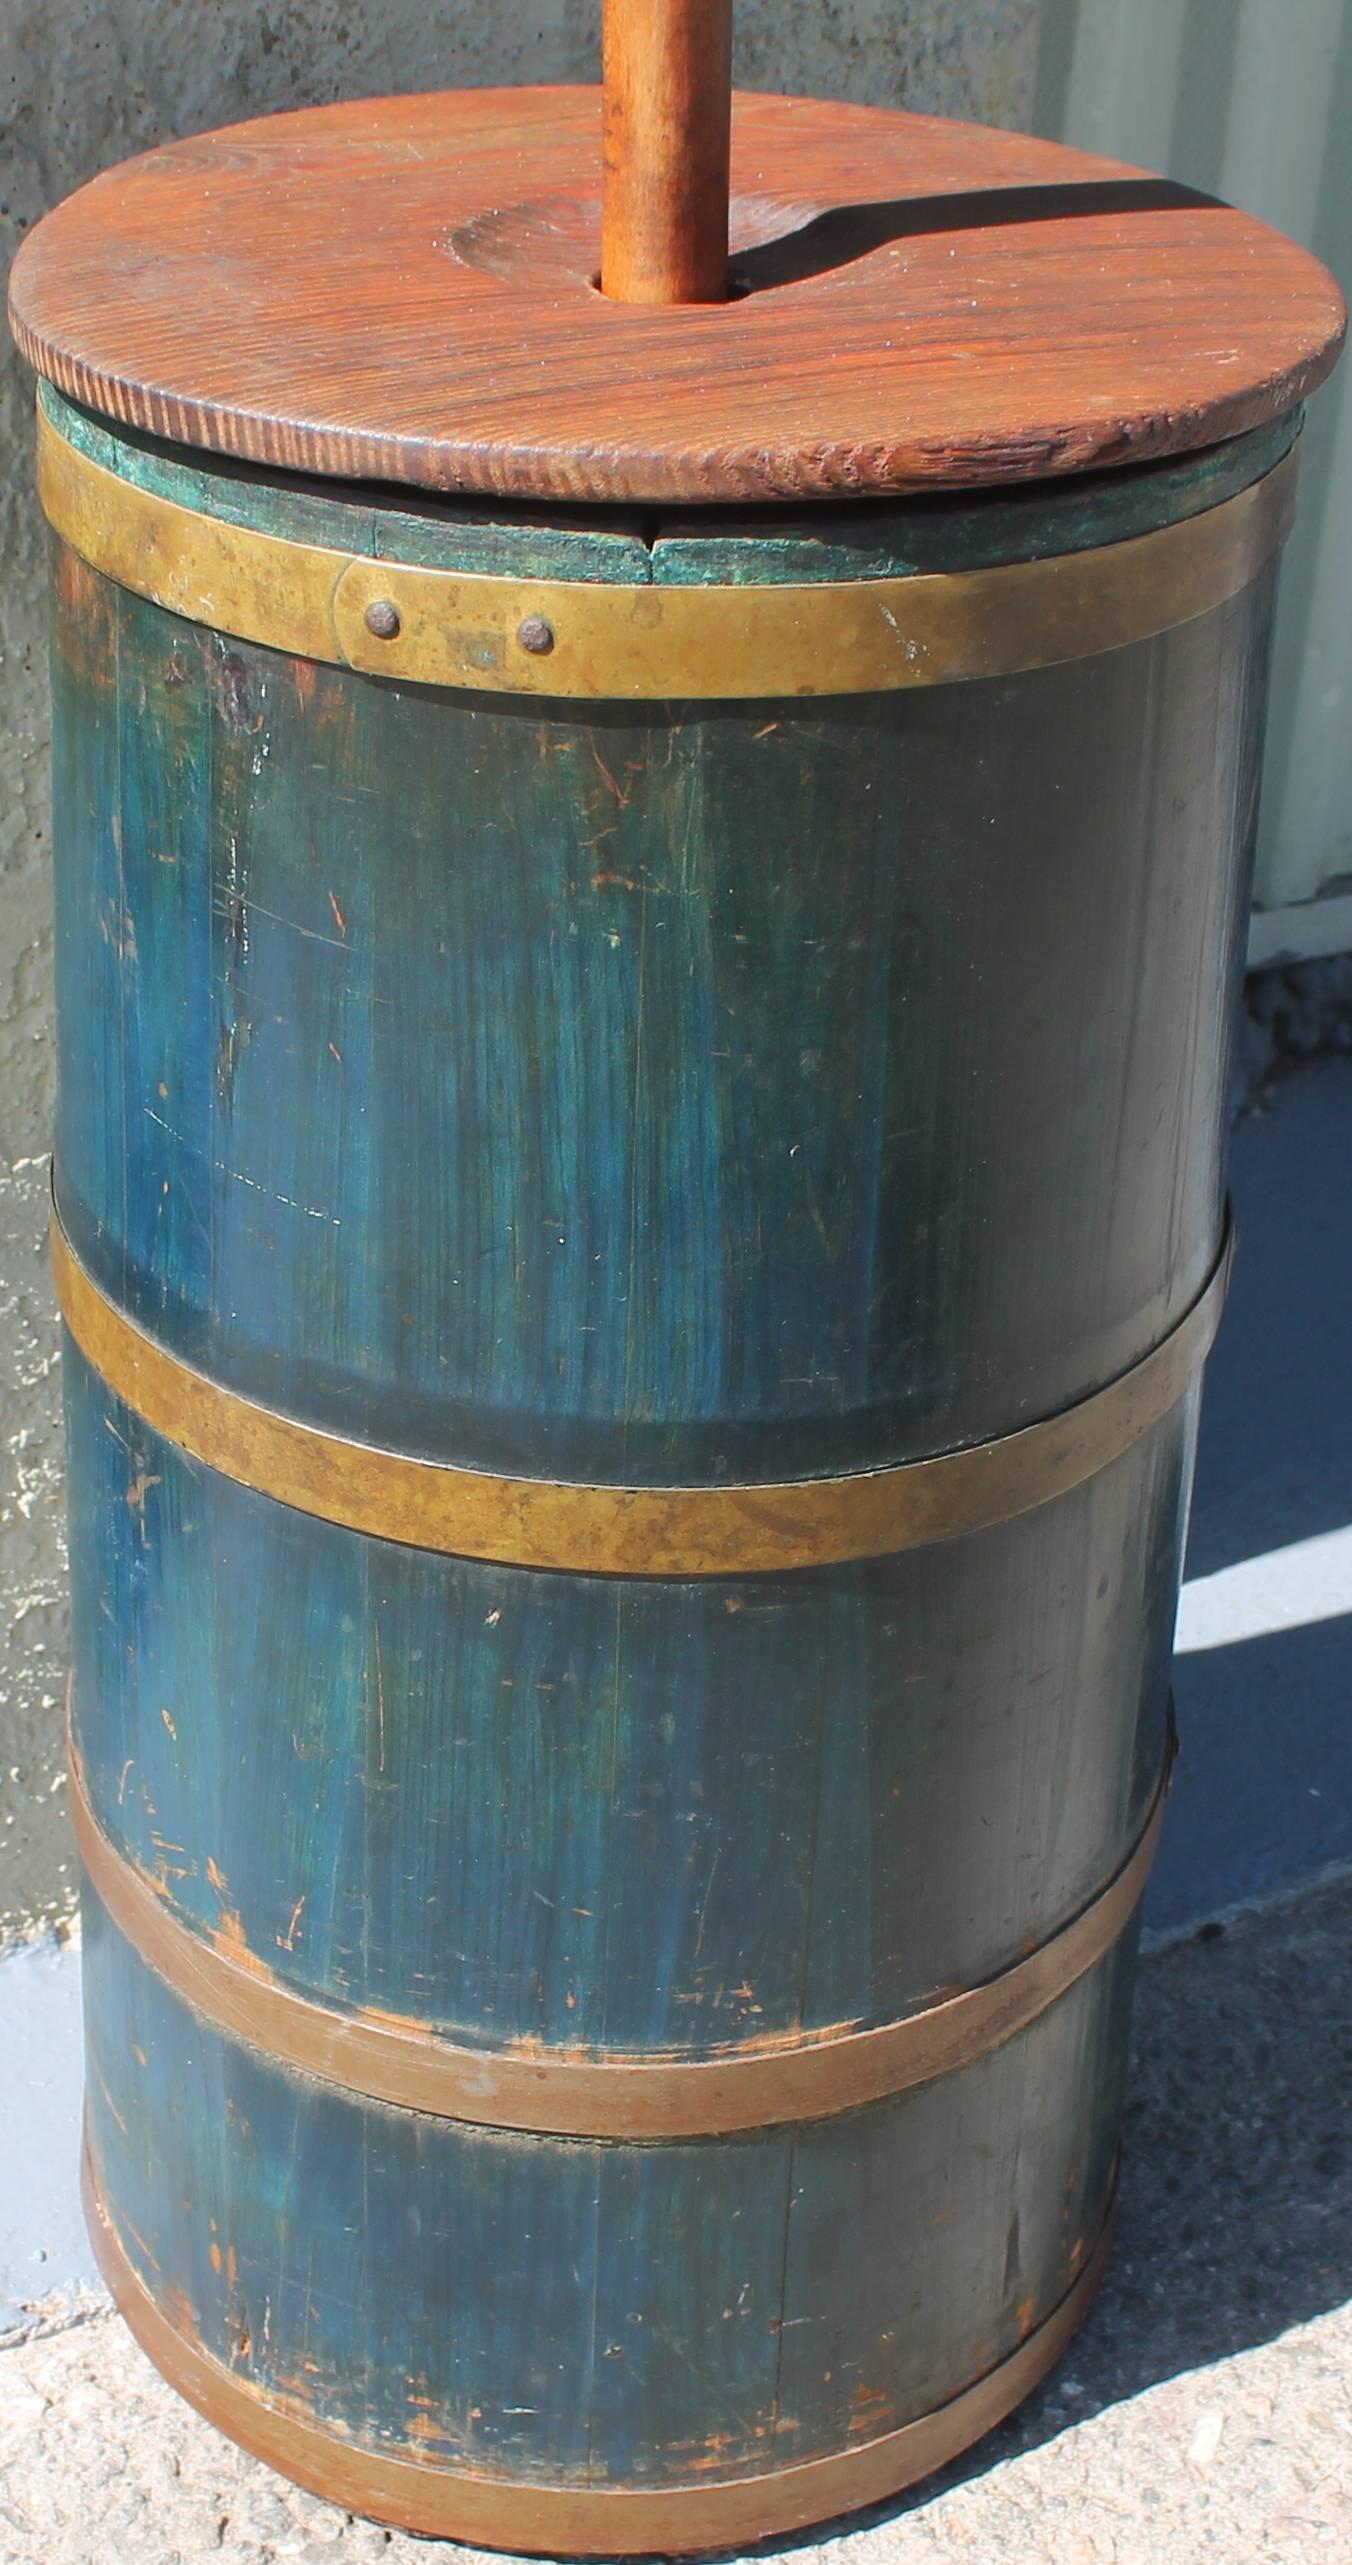 This is a spectacular handmade butter churn that was found on a farm in Illinois. The dark blue paint is wonderful. It has the original stomper inside. Great old patina!